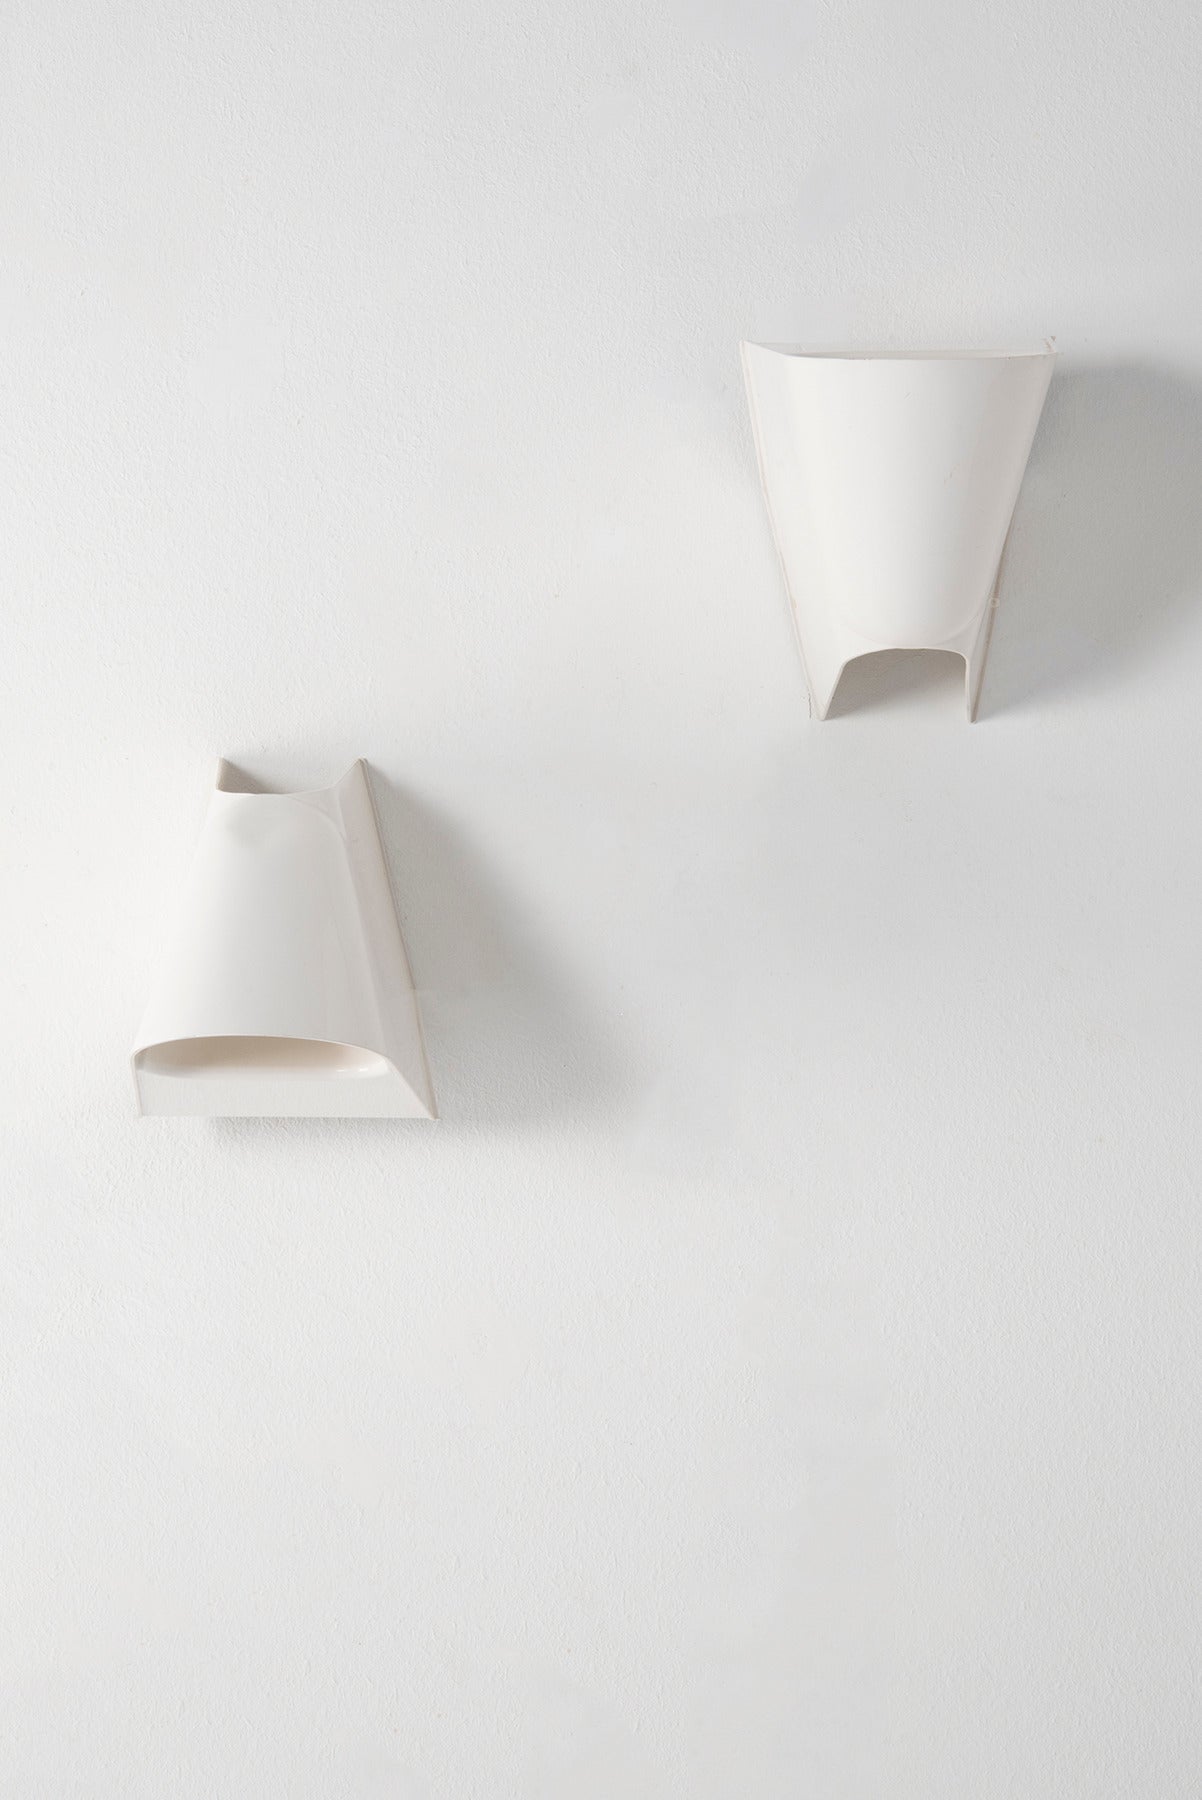 Late 20th Century Pair of Lucetta Wall / Table Lamps by Cini Boeri for Stilnovo